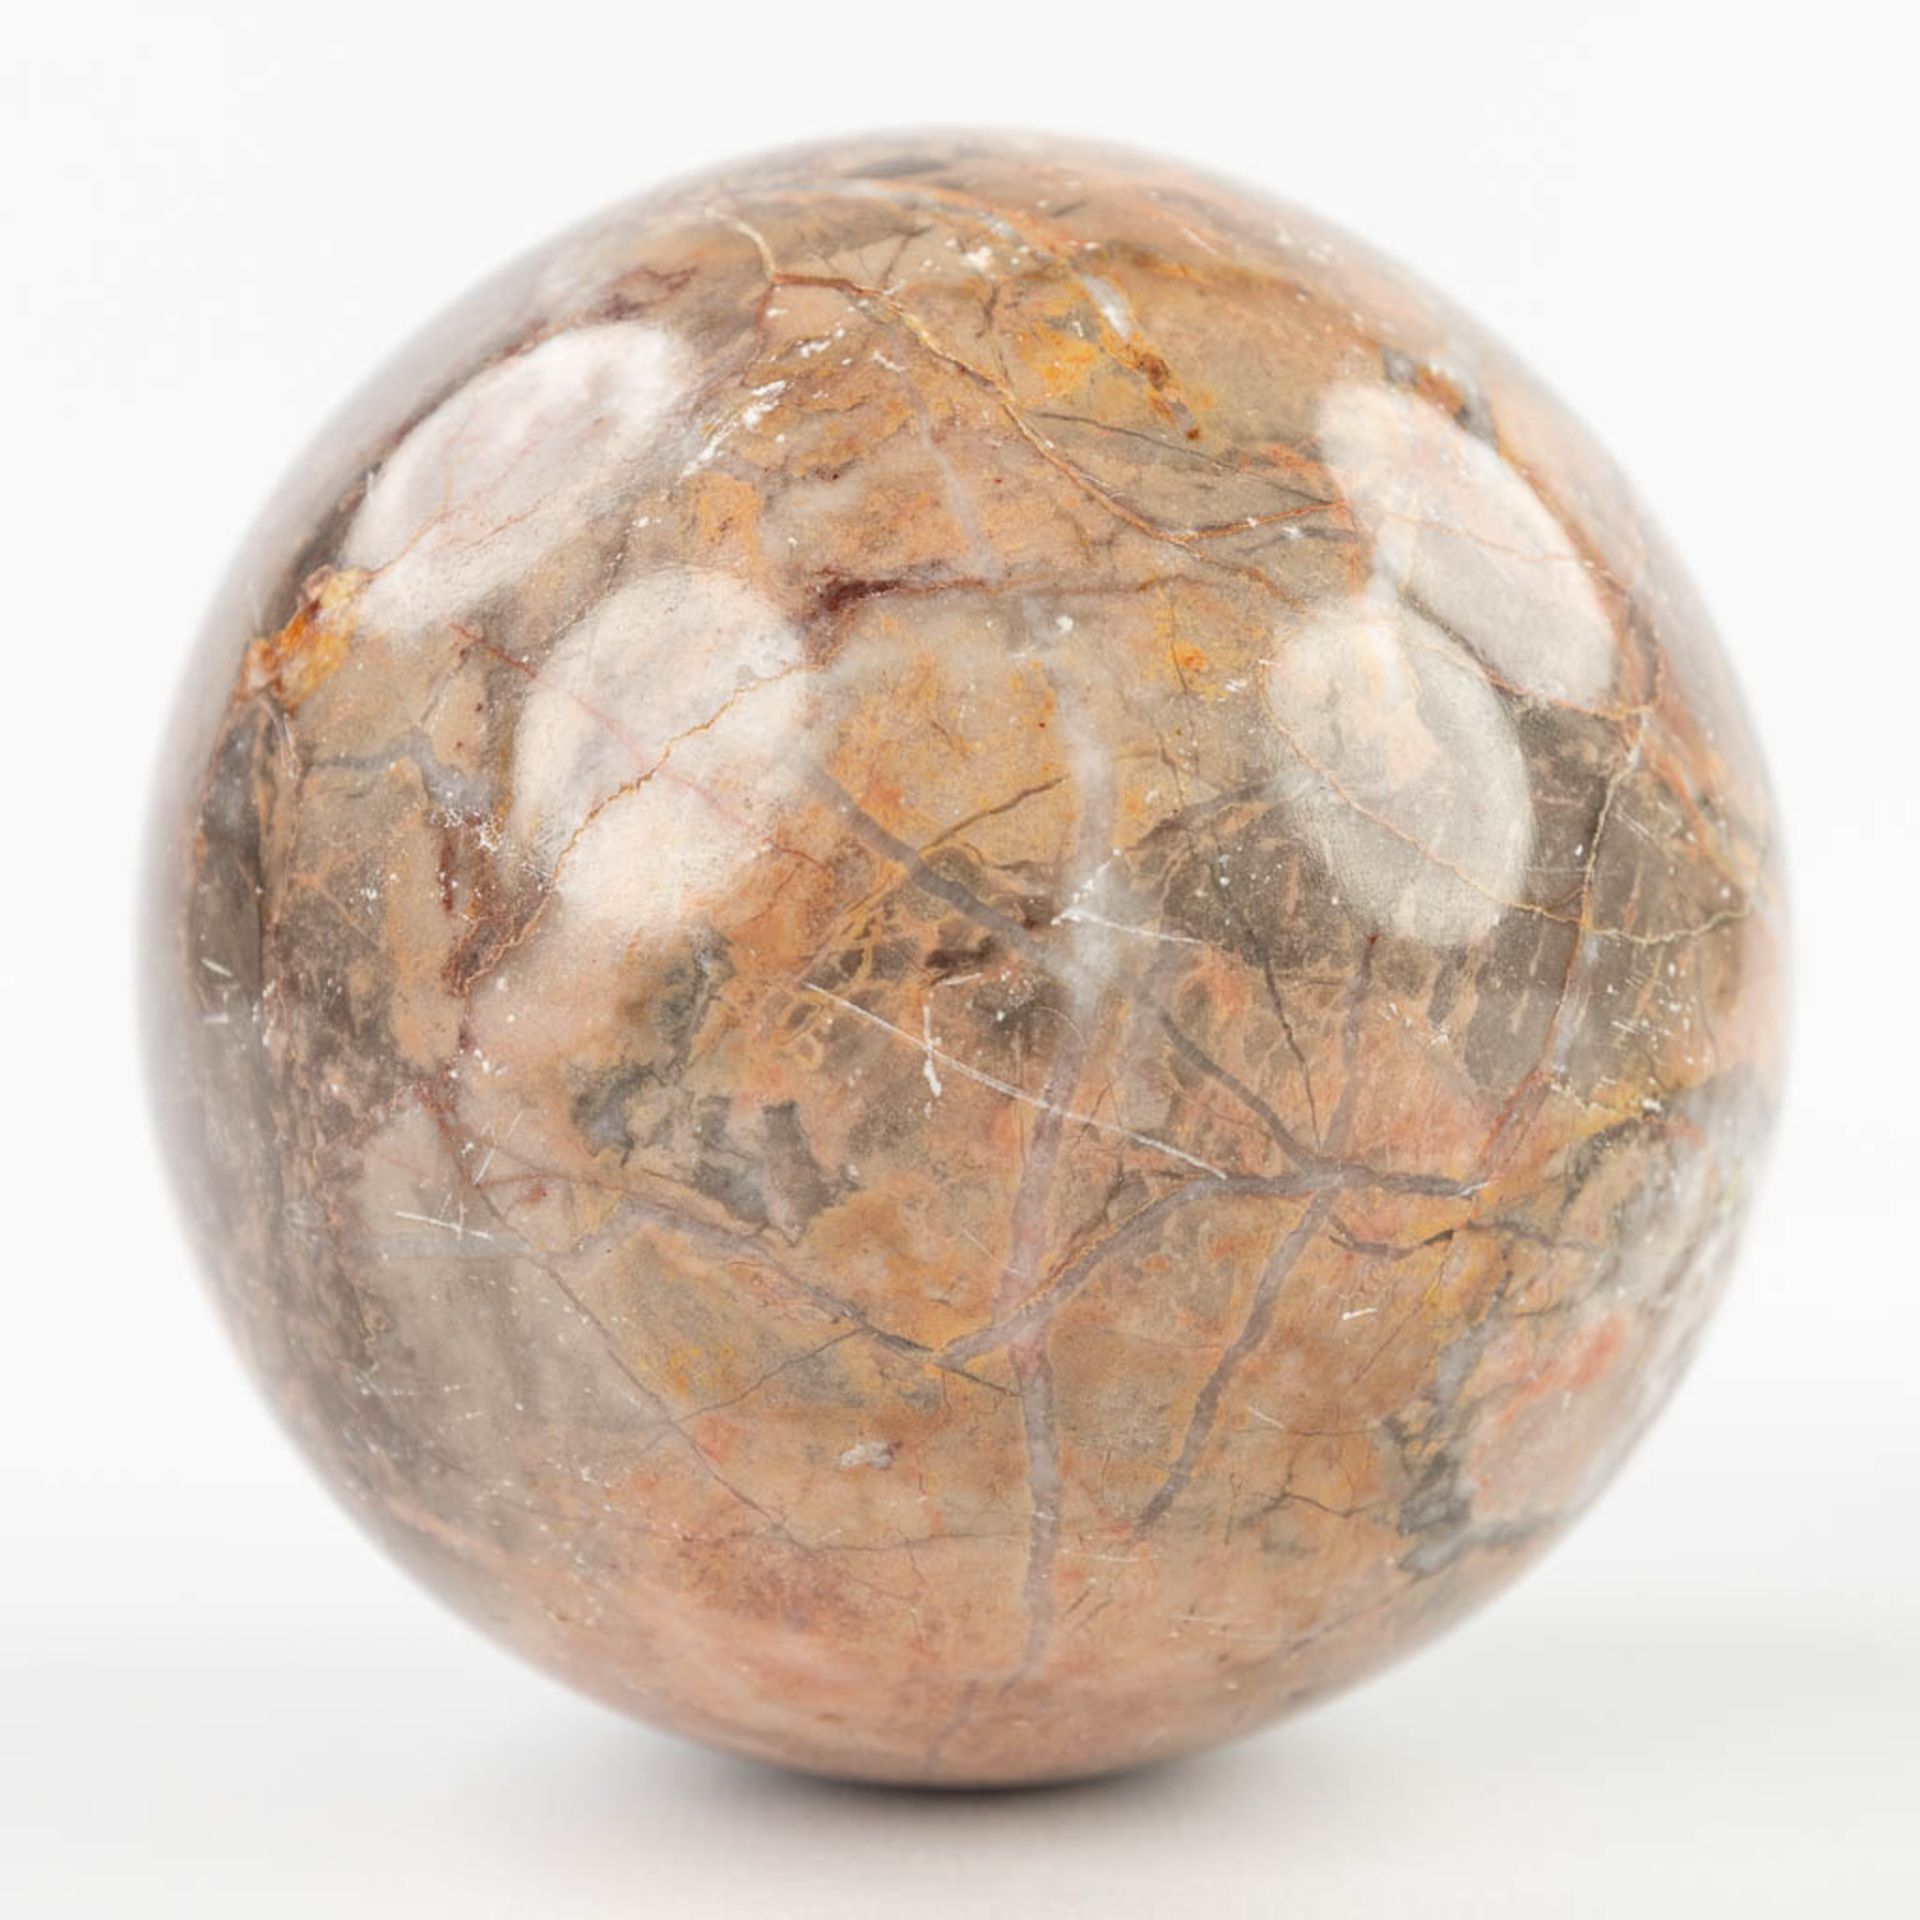 A set of 4 balls made of natural stone and marble. 20th century. (D: 9 cm) - Image 6 of 8